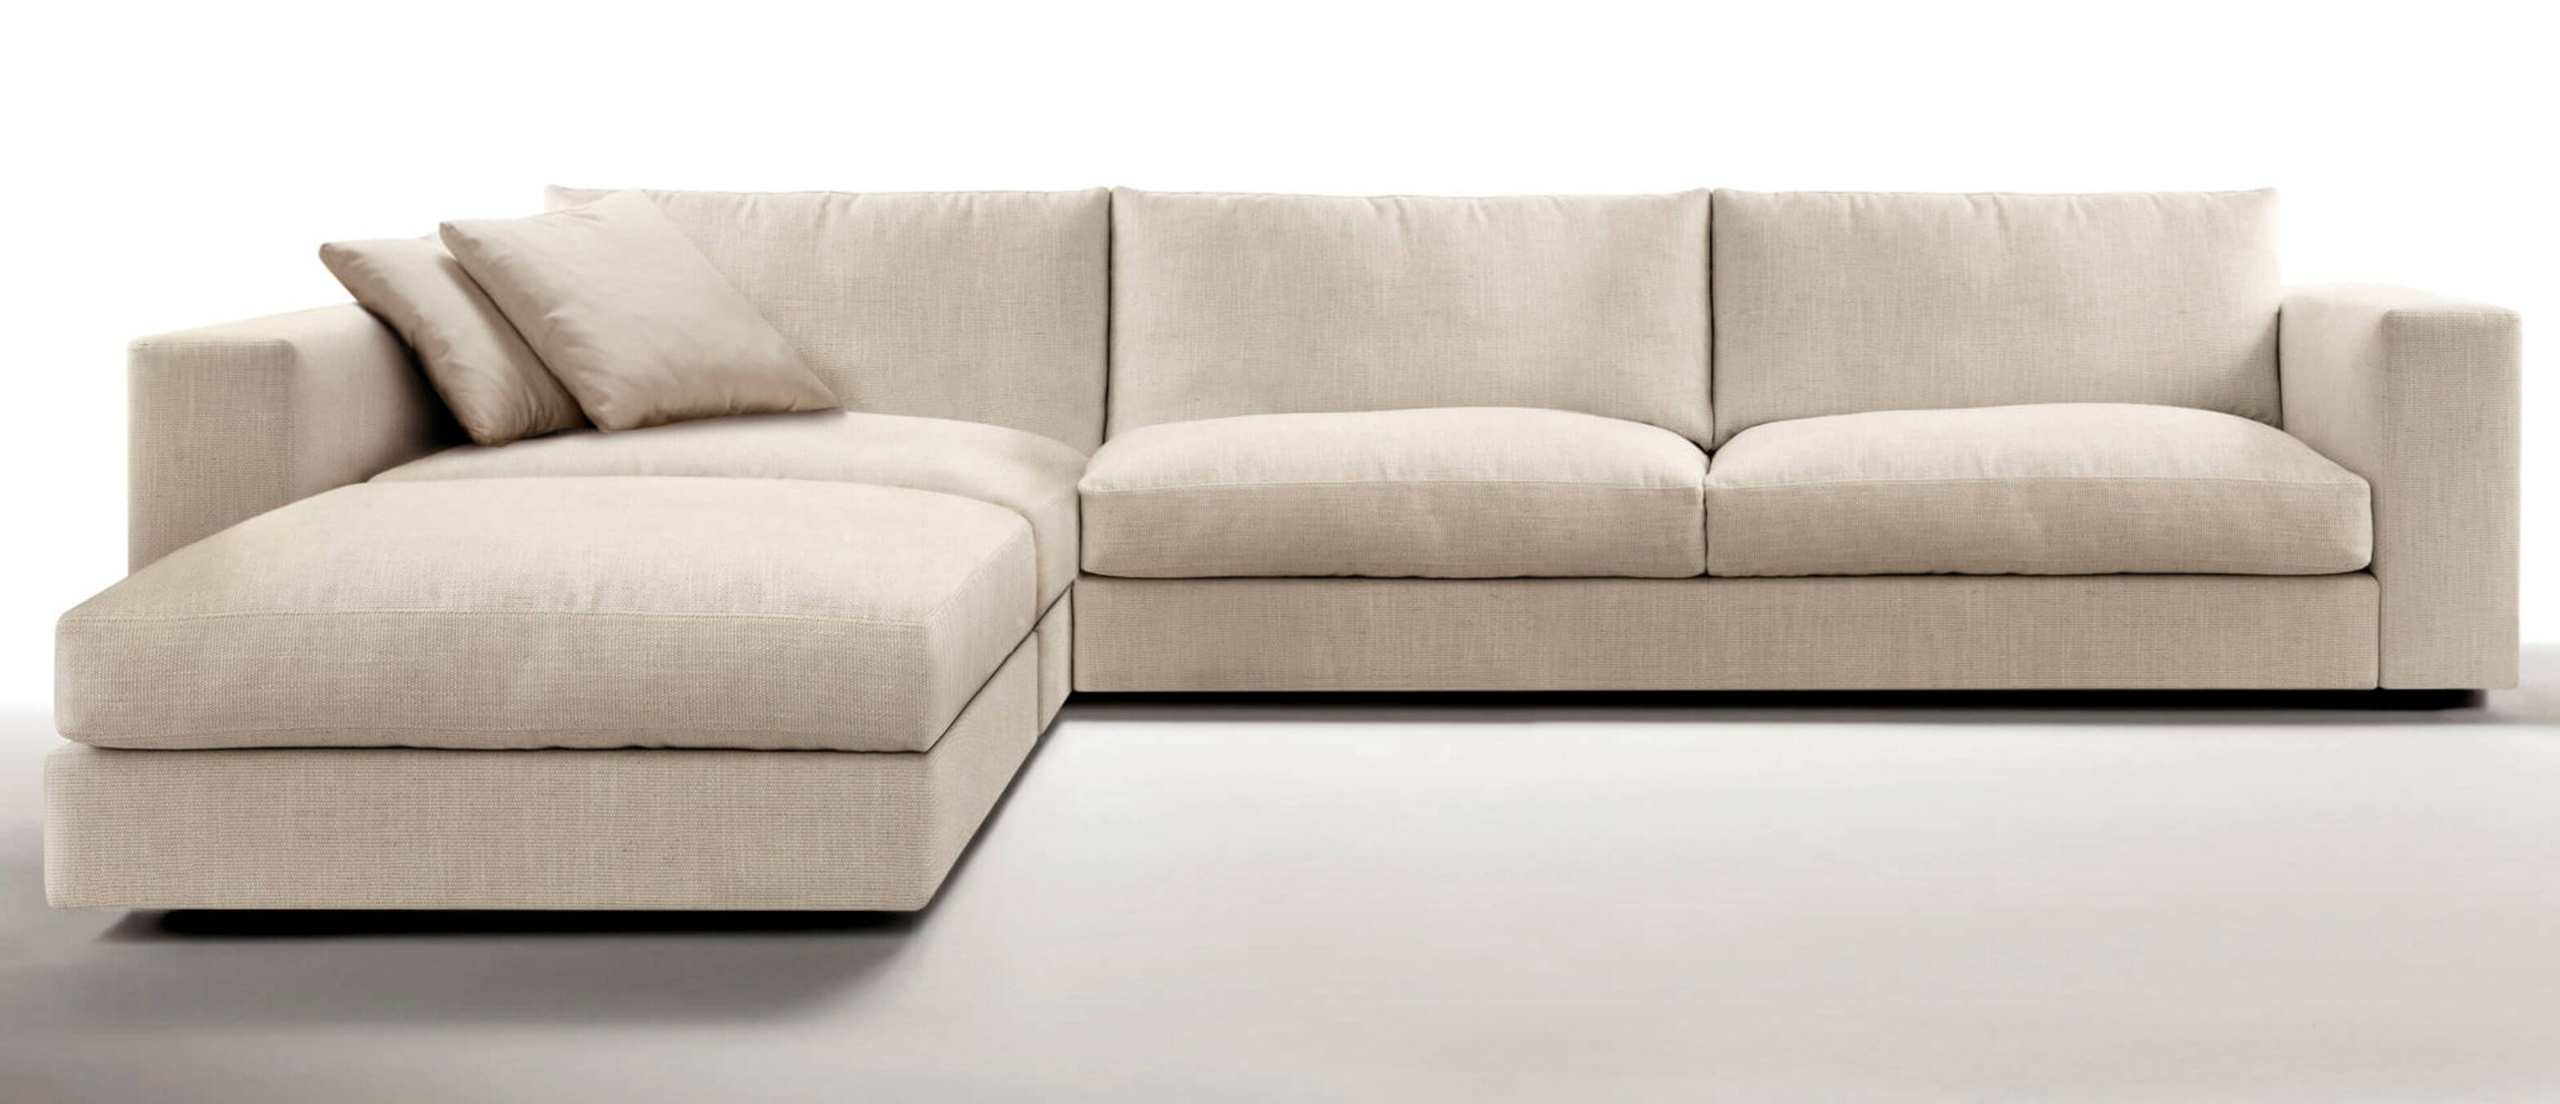 contemporary sectional modern sofa bed walmart